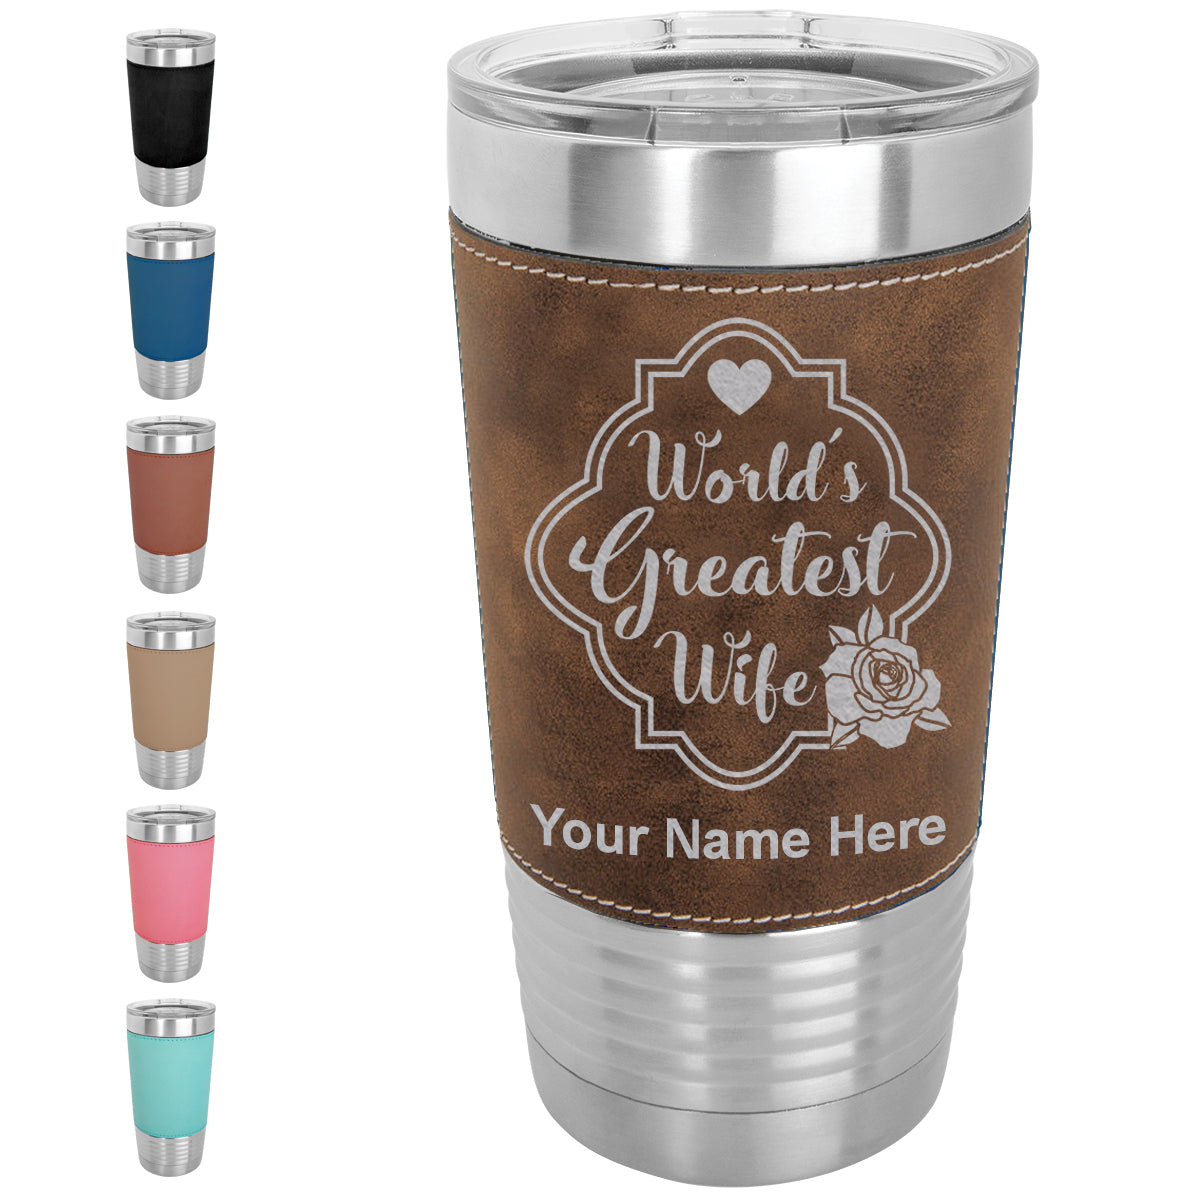 20oz Faux Leather Tumbler Mug, World's Greatest Wife, Personalized Engraving Included